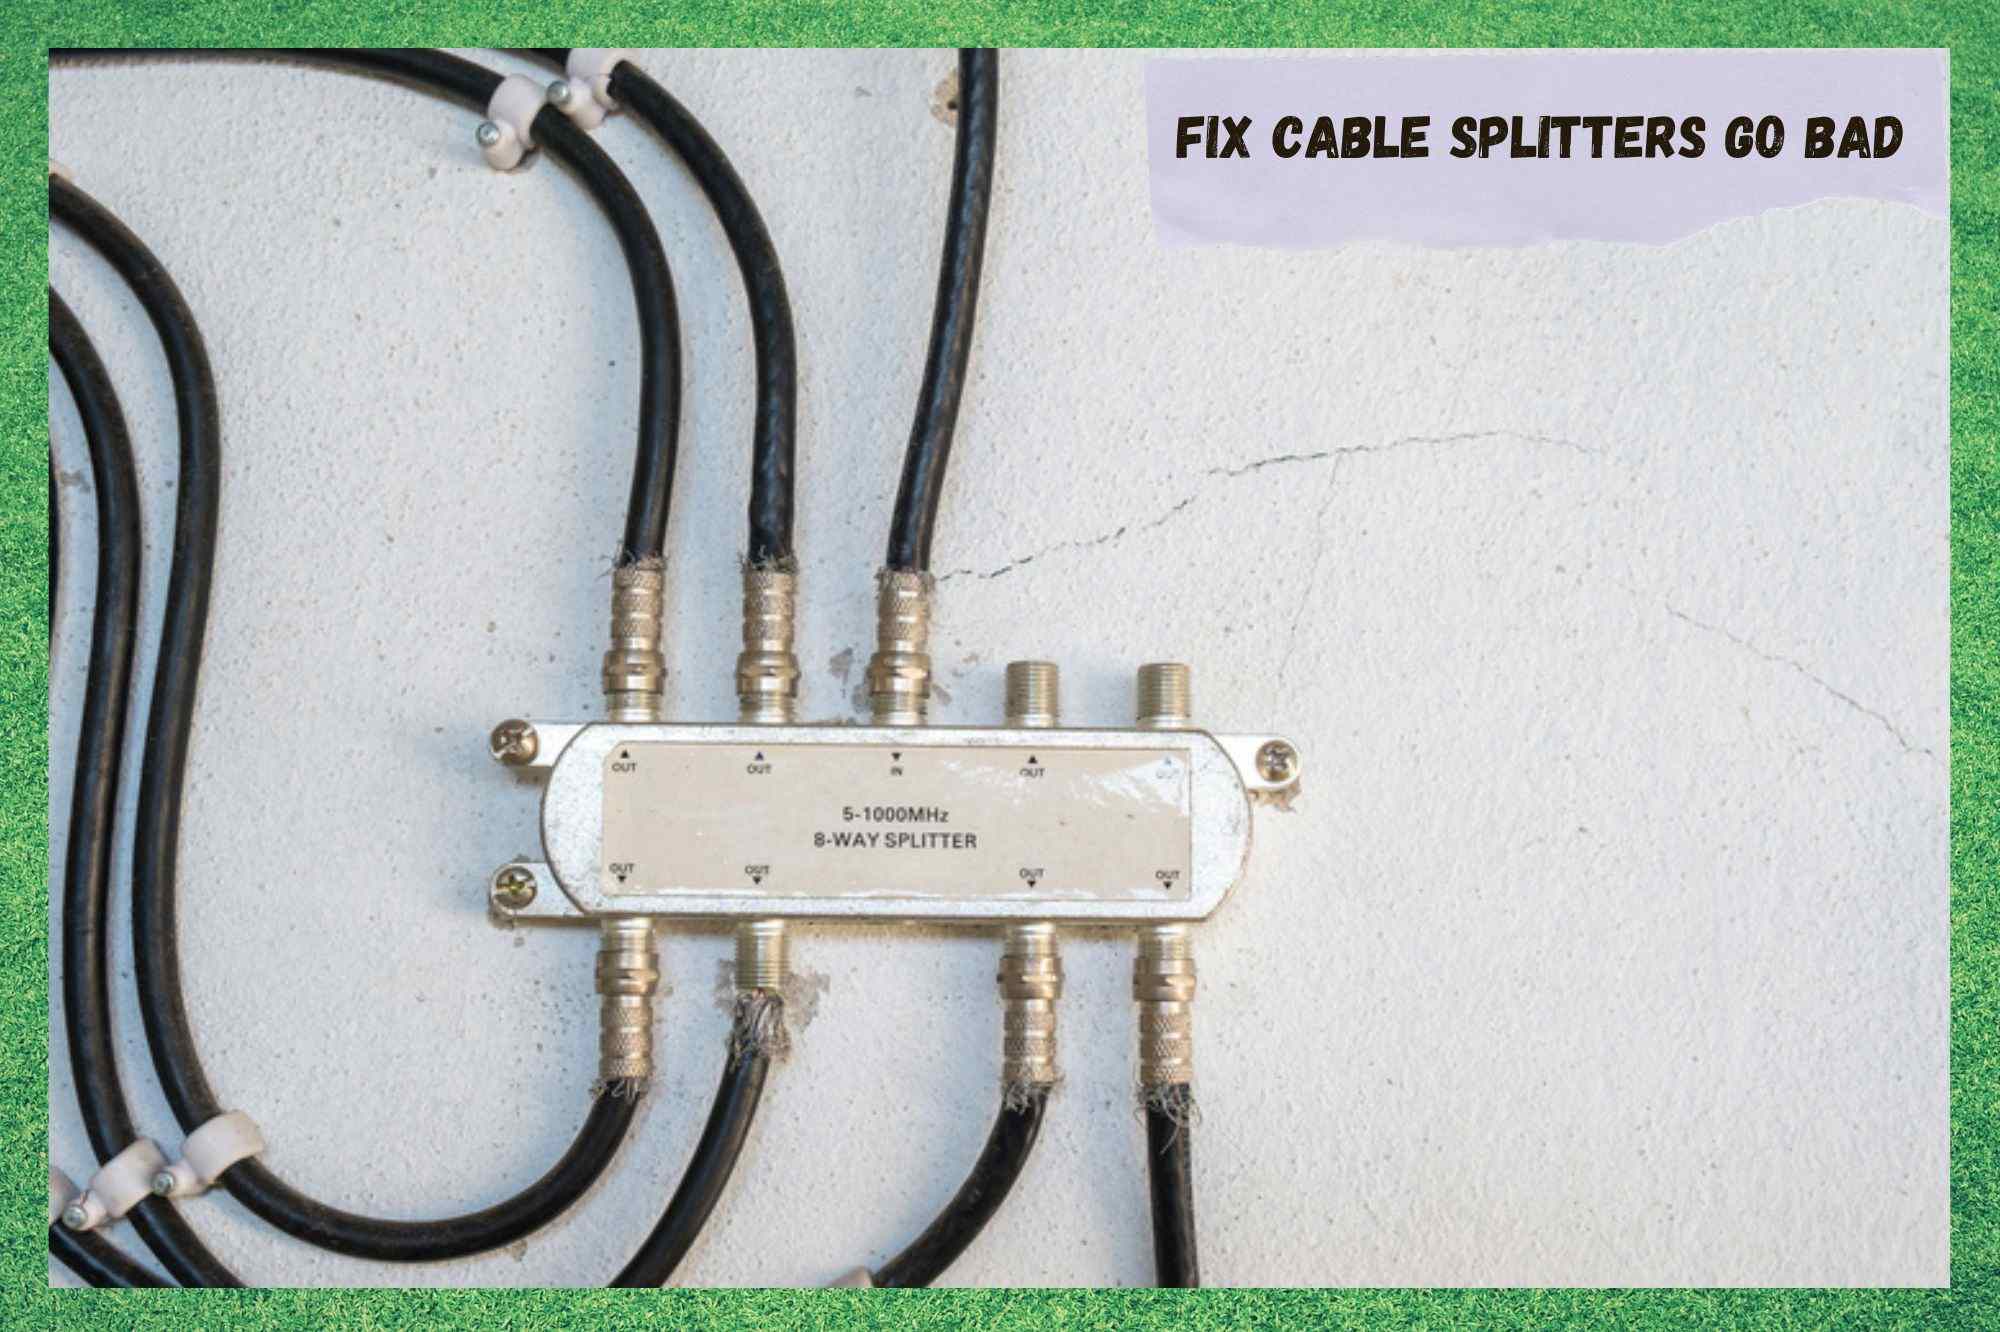 Do Cable Splitters Go Bad